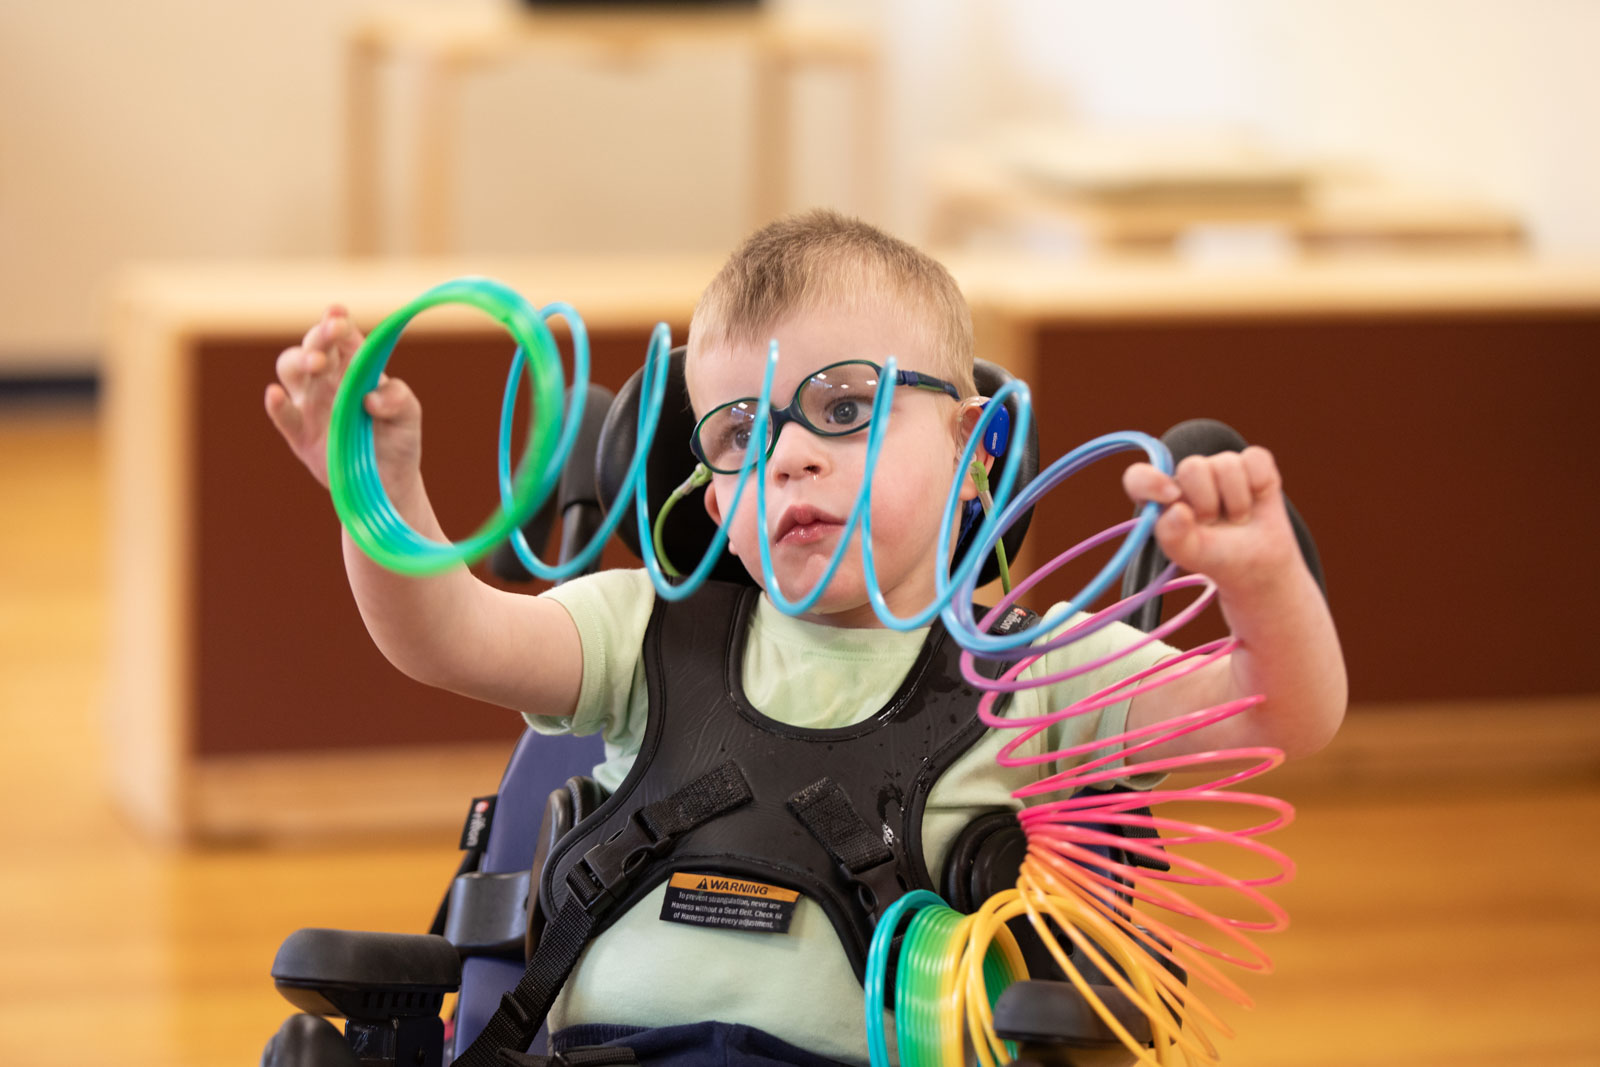 A young boy with glasses holds up a colorful slinky.